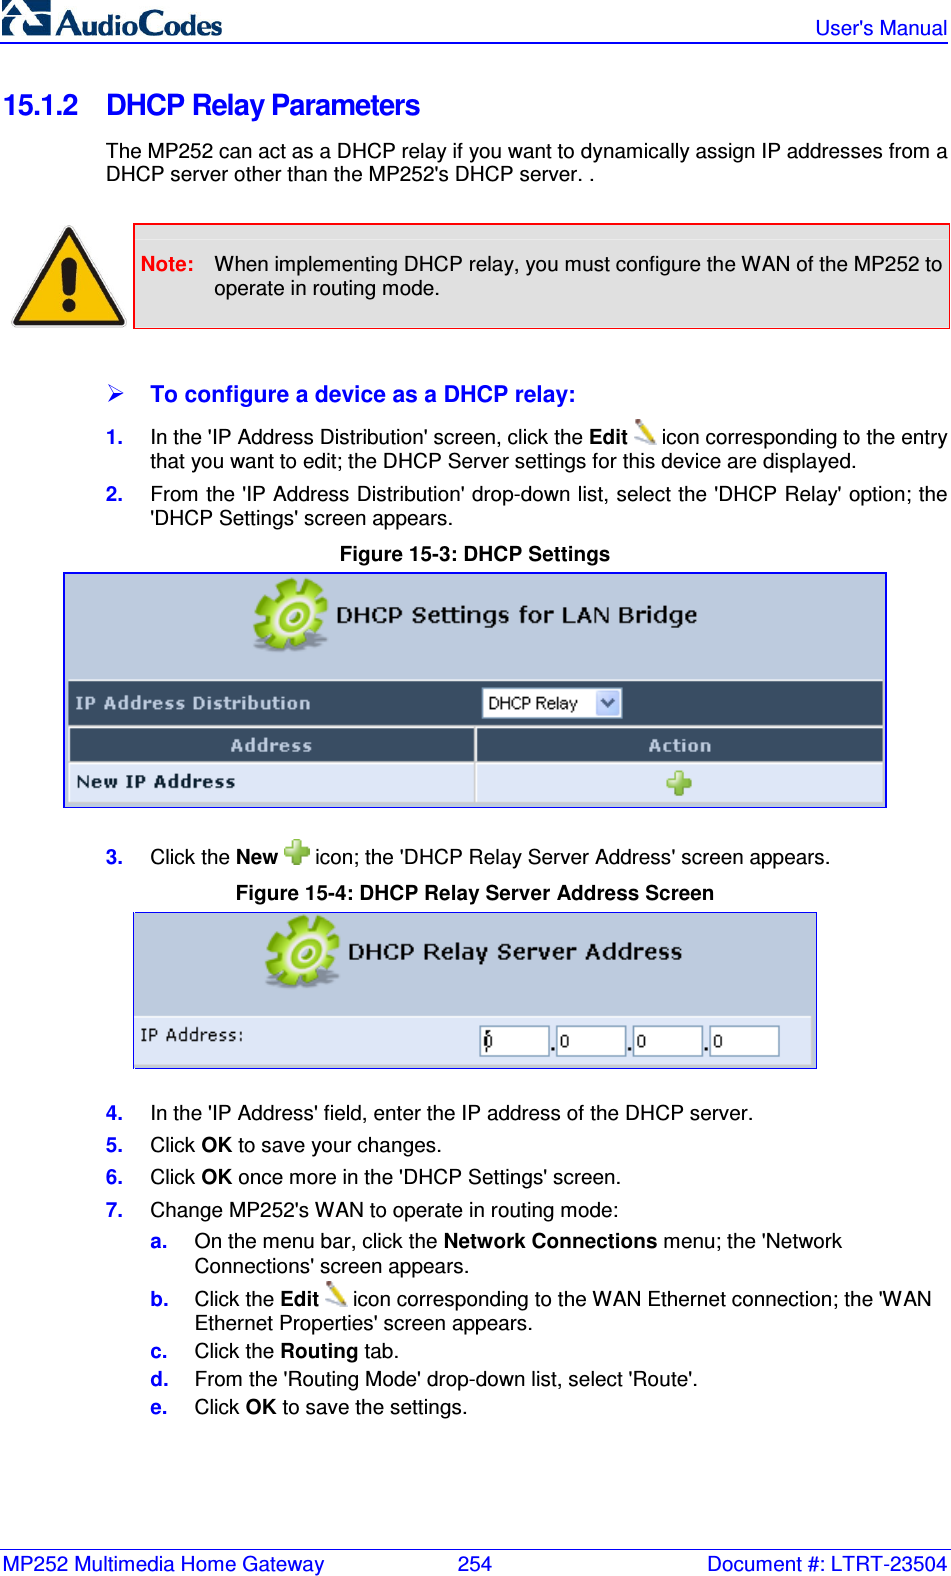 MP252 Multimedia Home Gateway  254  Document #: LTRT-23504   User&apos;s Manual  15.1.2  DHCP Relay Parameters The MP252 can act as a DHCP relay if you want to dynamically assign IP addresses from a DHCP server other than the MP252&apos;s DHCP server. .   Note:  When implementing DHCP relay, you must configure the WAN of the MP252 to operate in routing mode.   To configure a device as a DHCP relay: 1.  In the &apos;IP Address Distribution&apos; screen, click the Edit  icon corresponding to the entry that you want to edit; the DHCP Server settings for this device are displayed.  2.  From the &apos;IP Address Distribution&apos; drop-down list, select the &apos;DHCP Relay&apos; option; the &apos;DHCP Settings&apos; screen appears. Figure 15-3: DHCP Settings  3.  Click the New   icon; the &apos;DHCP Relay Server Address&apos; screen appears.  Figure 15-4: DHCP Relay Server Address Screen  4.  In the &apos;IP Address&apos; field, enter the IP address of the DHCP server. 5.  Click OK to save your changes. 6.  Click OK once more in the &apos;DHCP Settings&apos; screen. 7.  Change MP252&apos;s WAN to operate in routing mode: a.  On the menu bar, click the Network Connections menu; the &apos;Network Connections&apos; screen appears. b.  Click the Edit   icon corresponding to the WAN Ethernet connection; the &apos;WAN Ethernet Properties&apos; screen appears. c.  Click the Routing tab. d.  From the &apos;Routing Mode&apos; drop-down list, select &apos;Route&apos;. e.  Click OK to save the settings.  